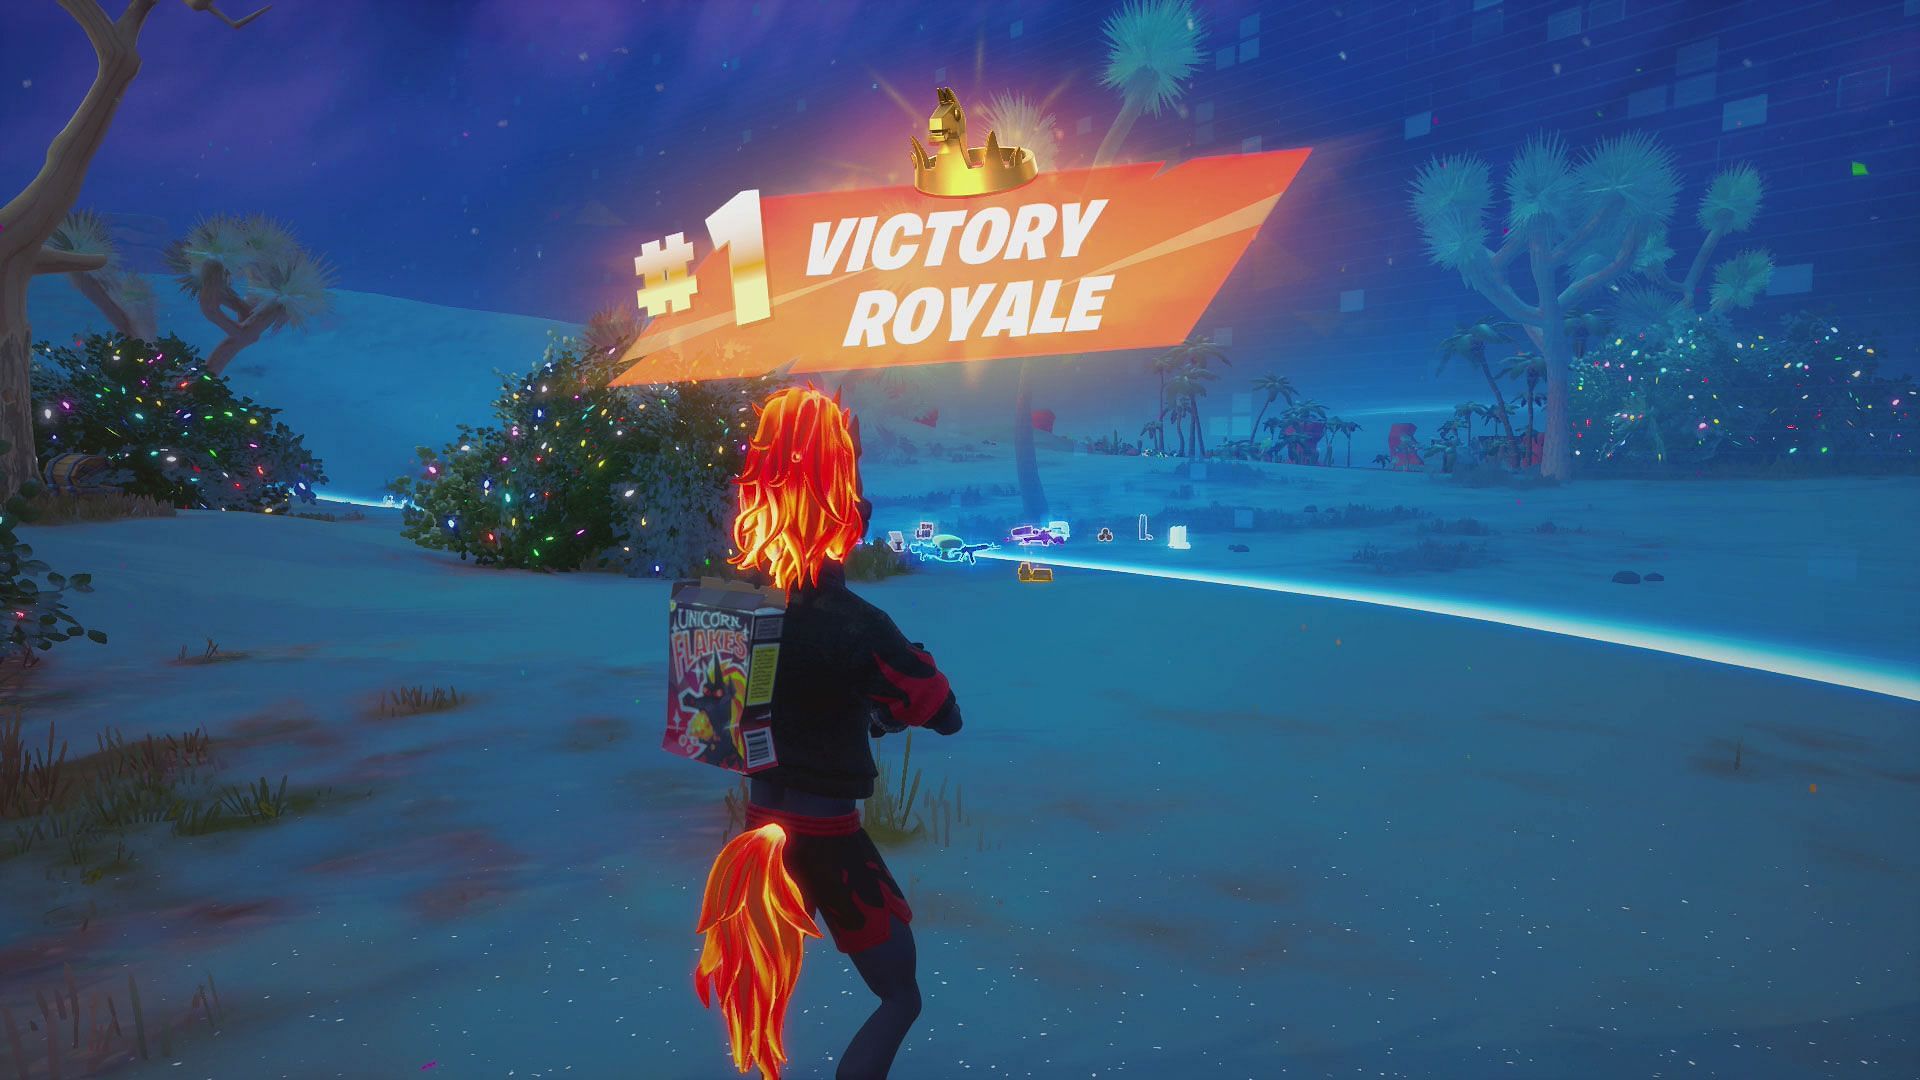 Victory Crowns in Fortnite explained (Image via Fortnite)